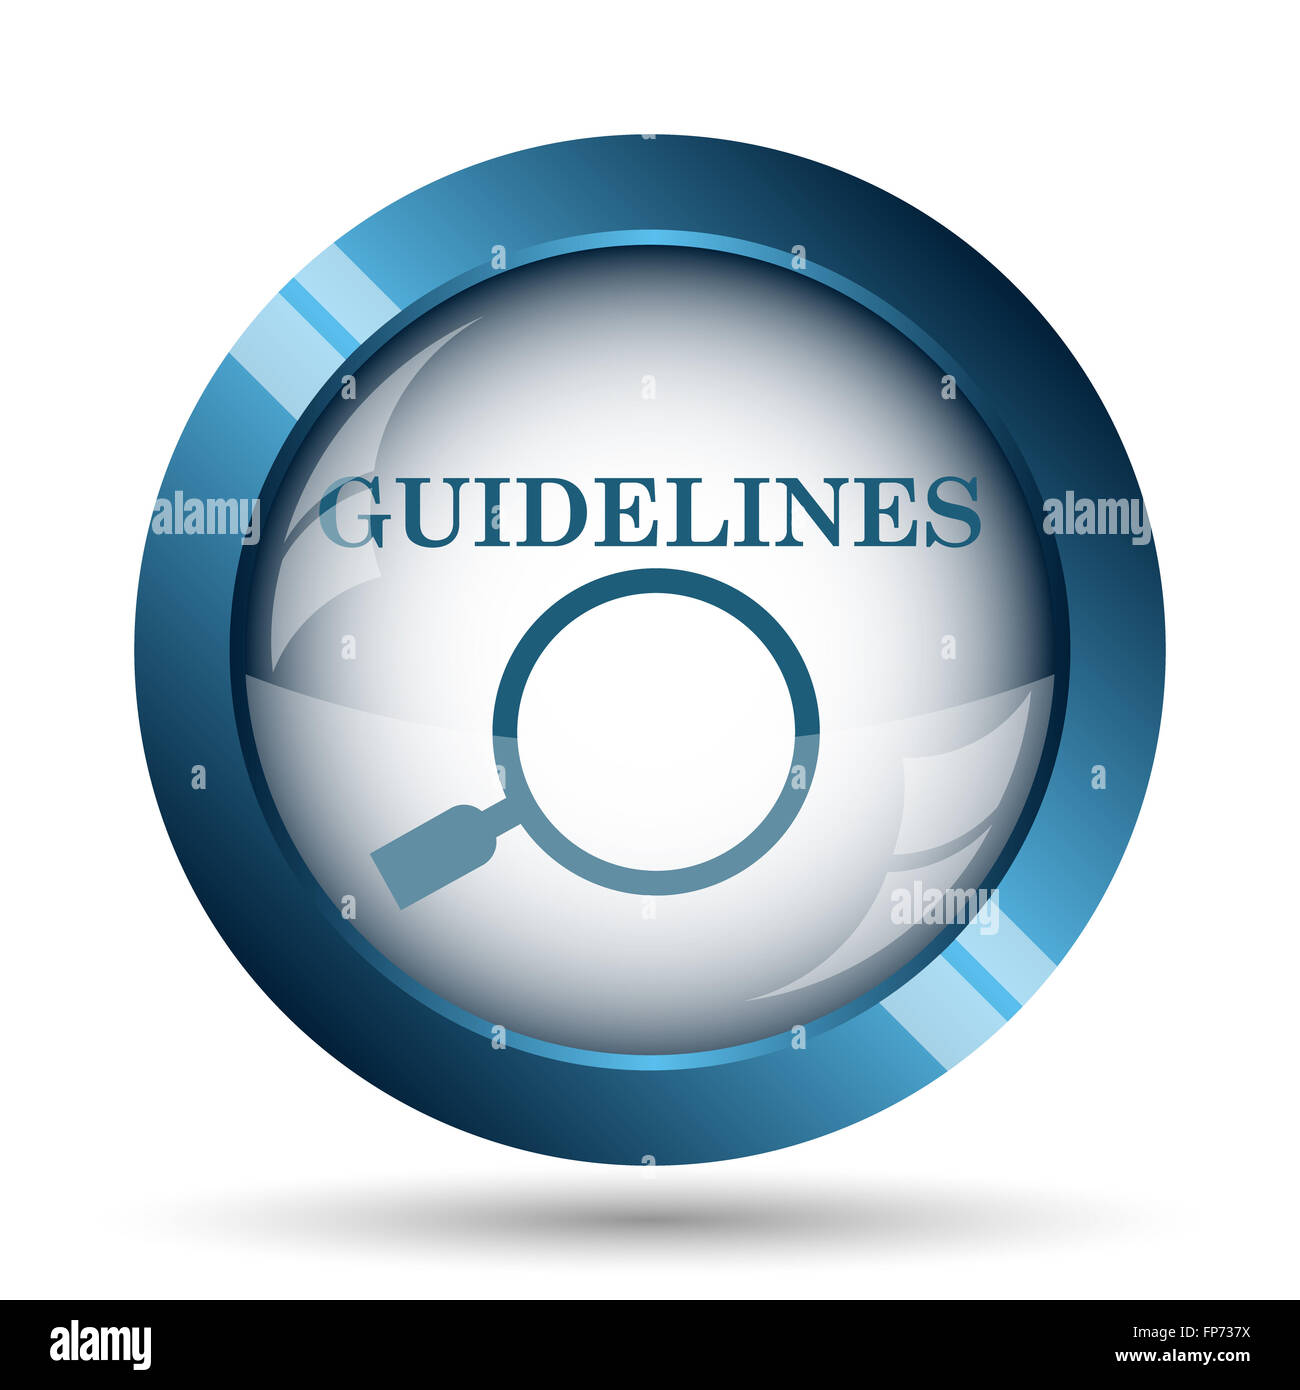 Guidelines icon. button on white background Stock Photo Alamy